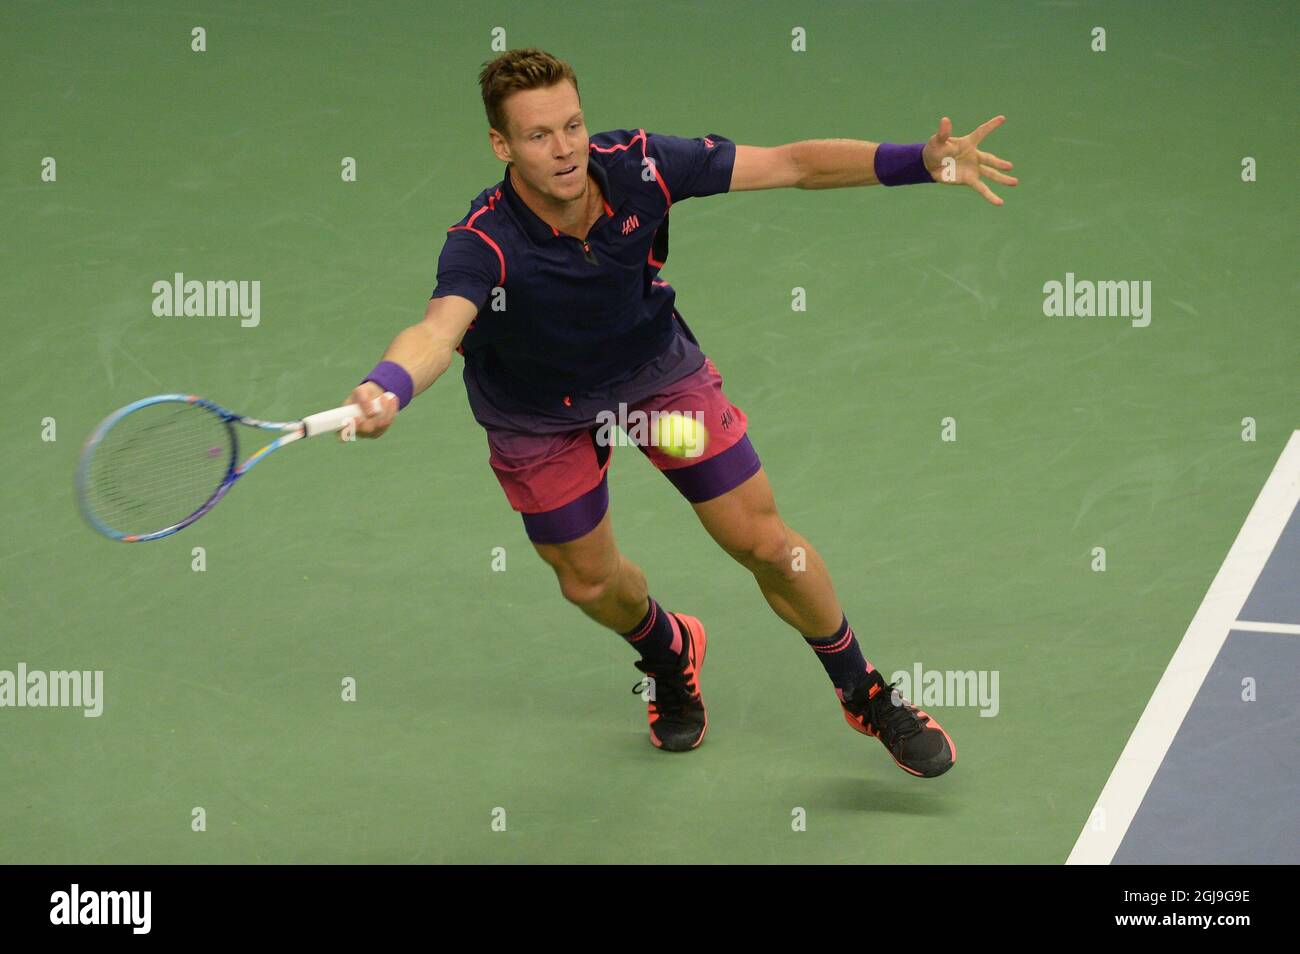 Tomas Berdych, of Czech Republic returns to Jack Sock, of US during the Stockholm Open final Sunday Oct. 25, 2015. Foto: Anders Wiklund / TT / Kod 10040 Stock Photo